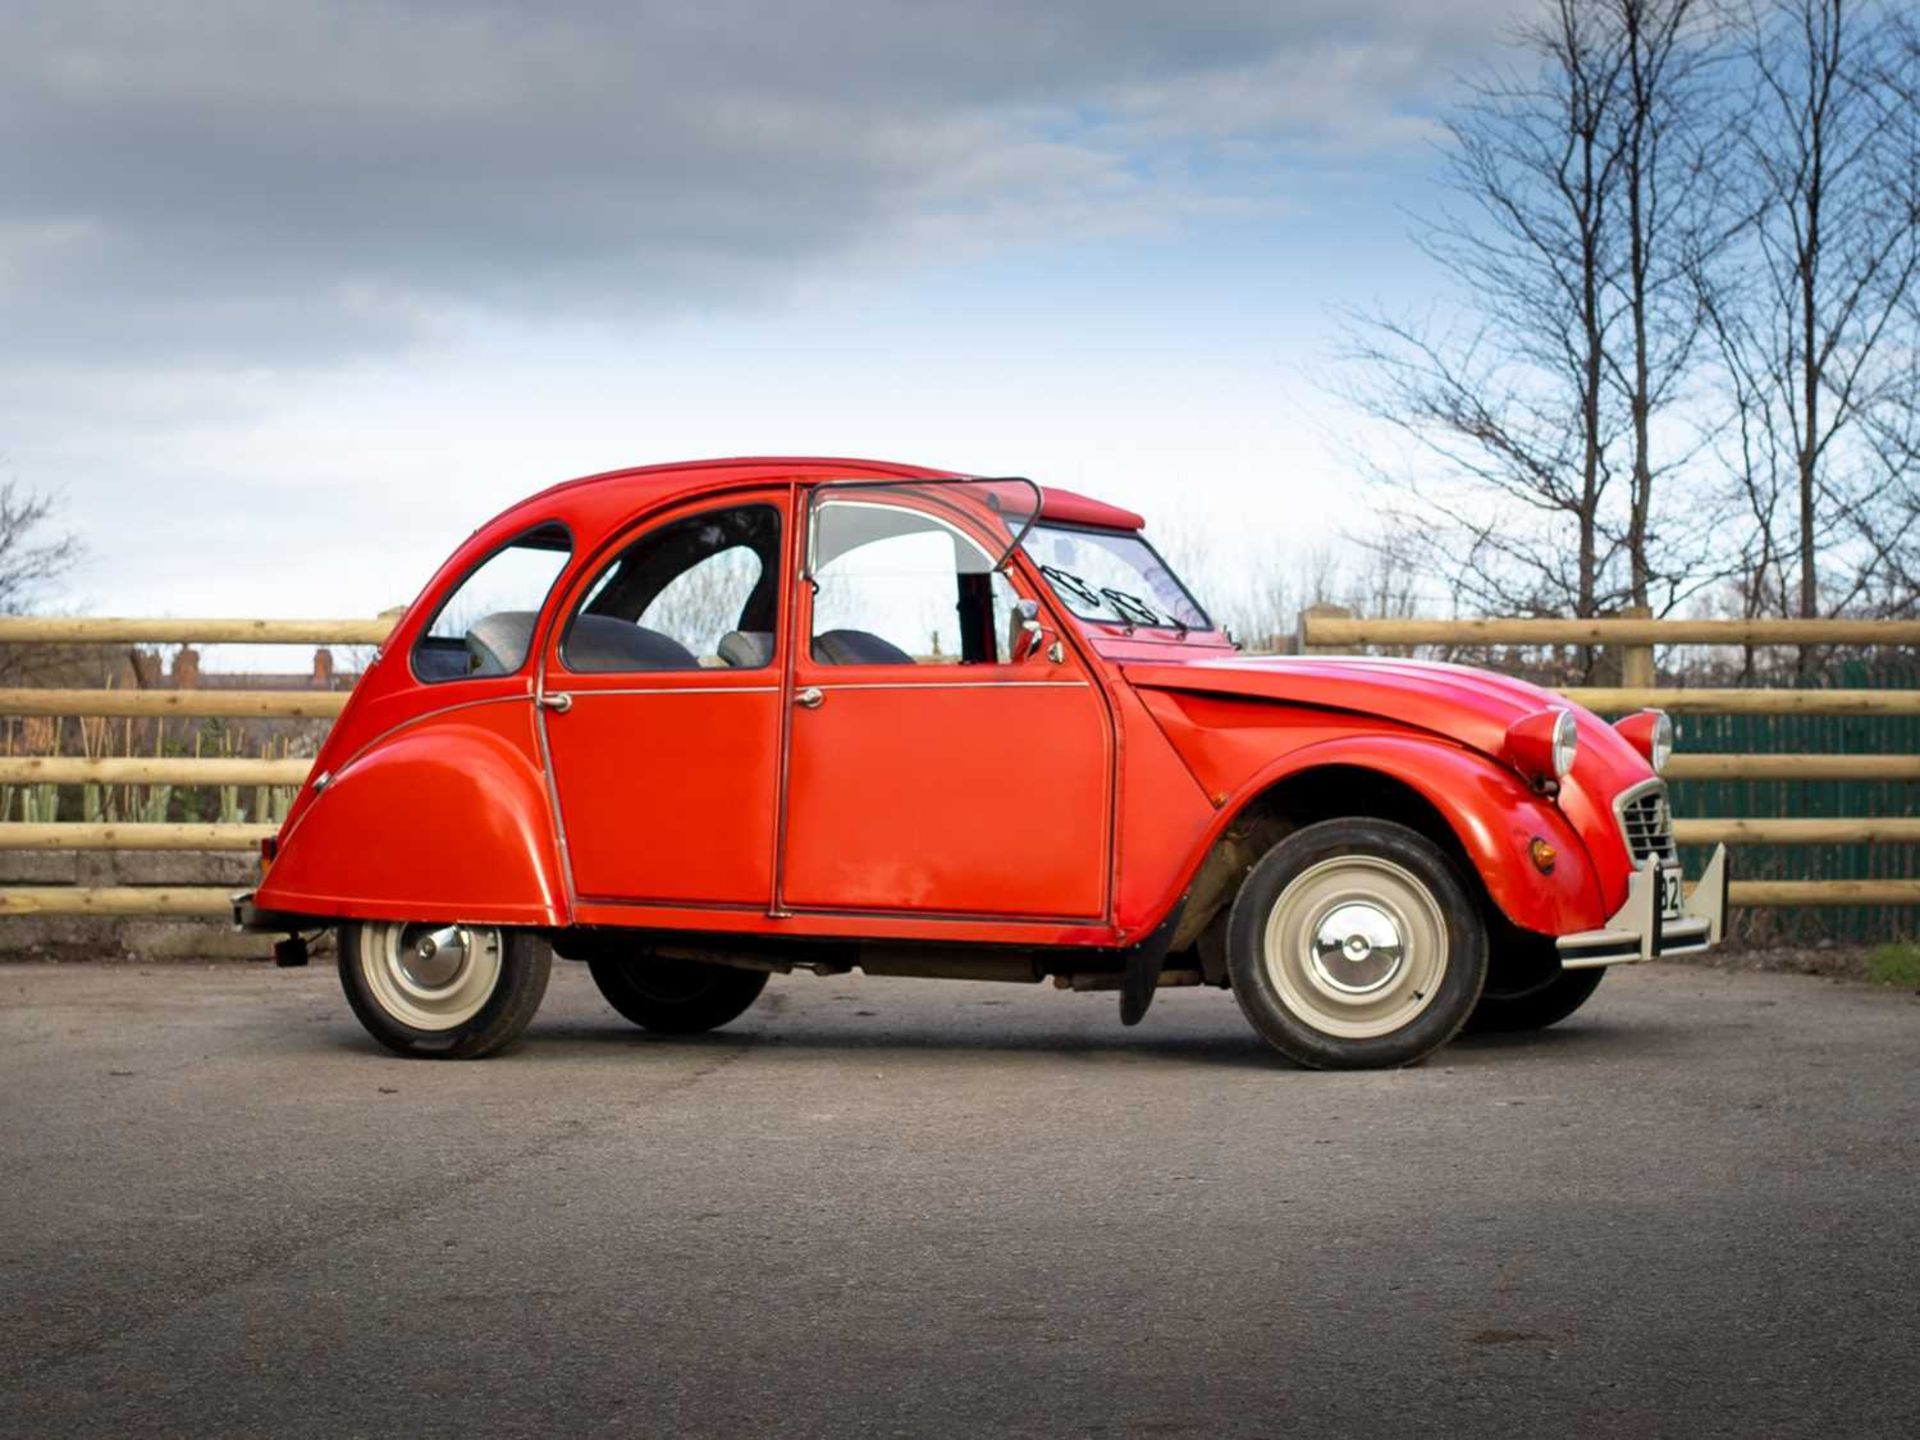 1989 Citroën 2CV6 Spécial Believed to have covered a credible 15,000 miles - Image 28 of 113